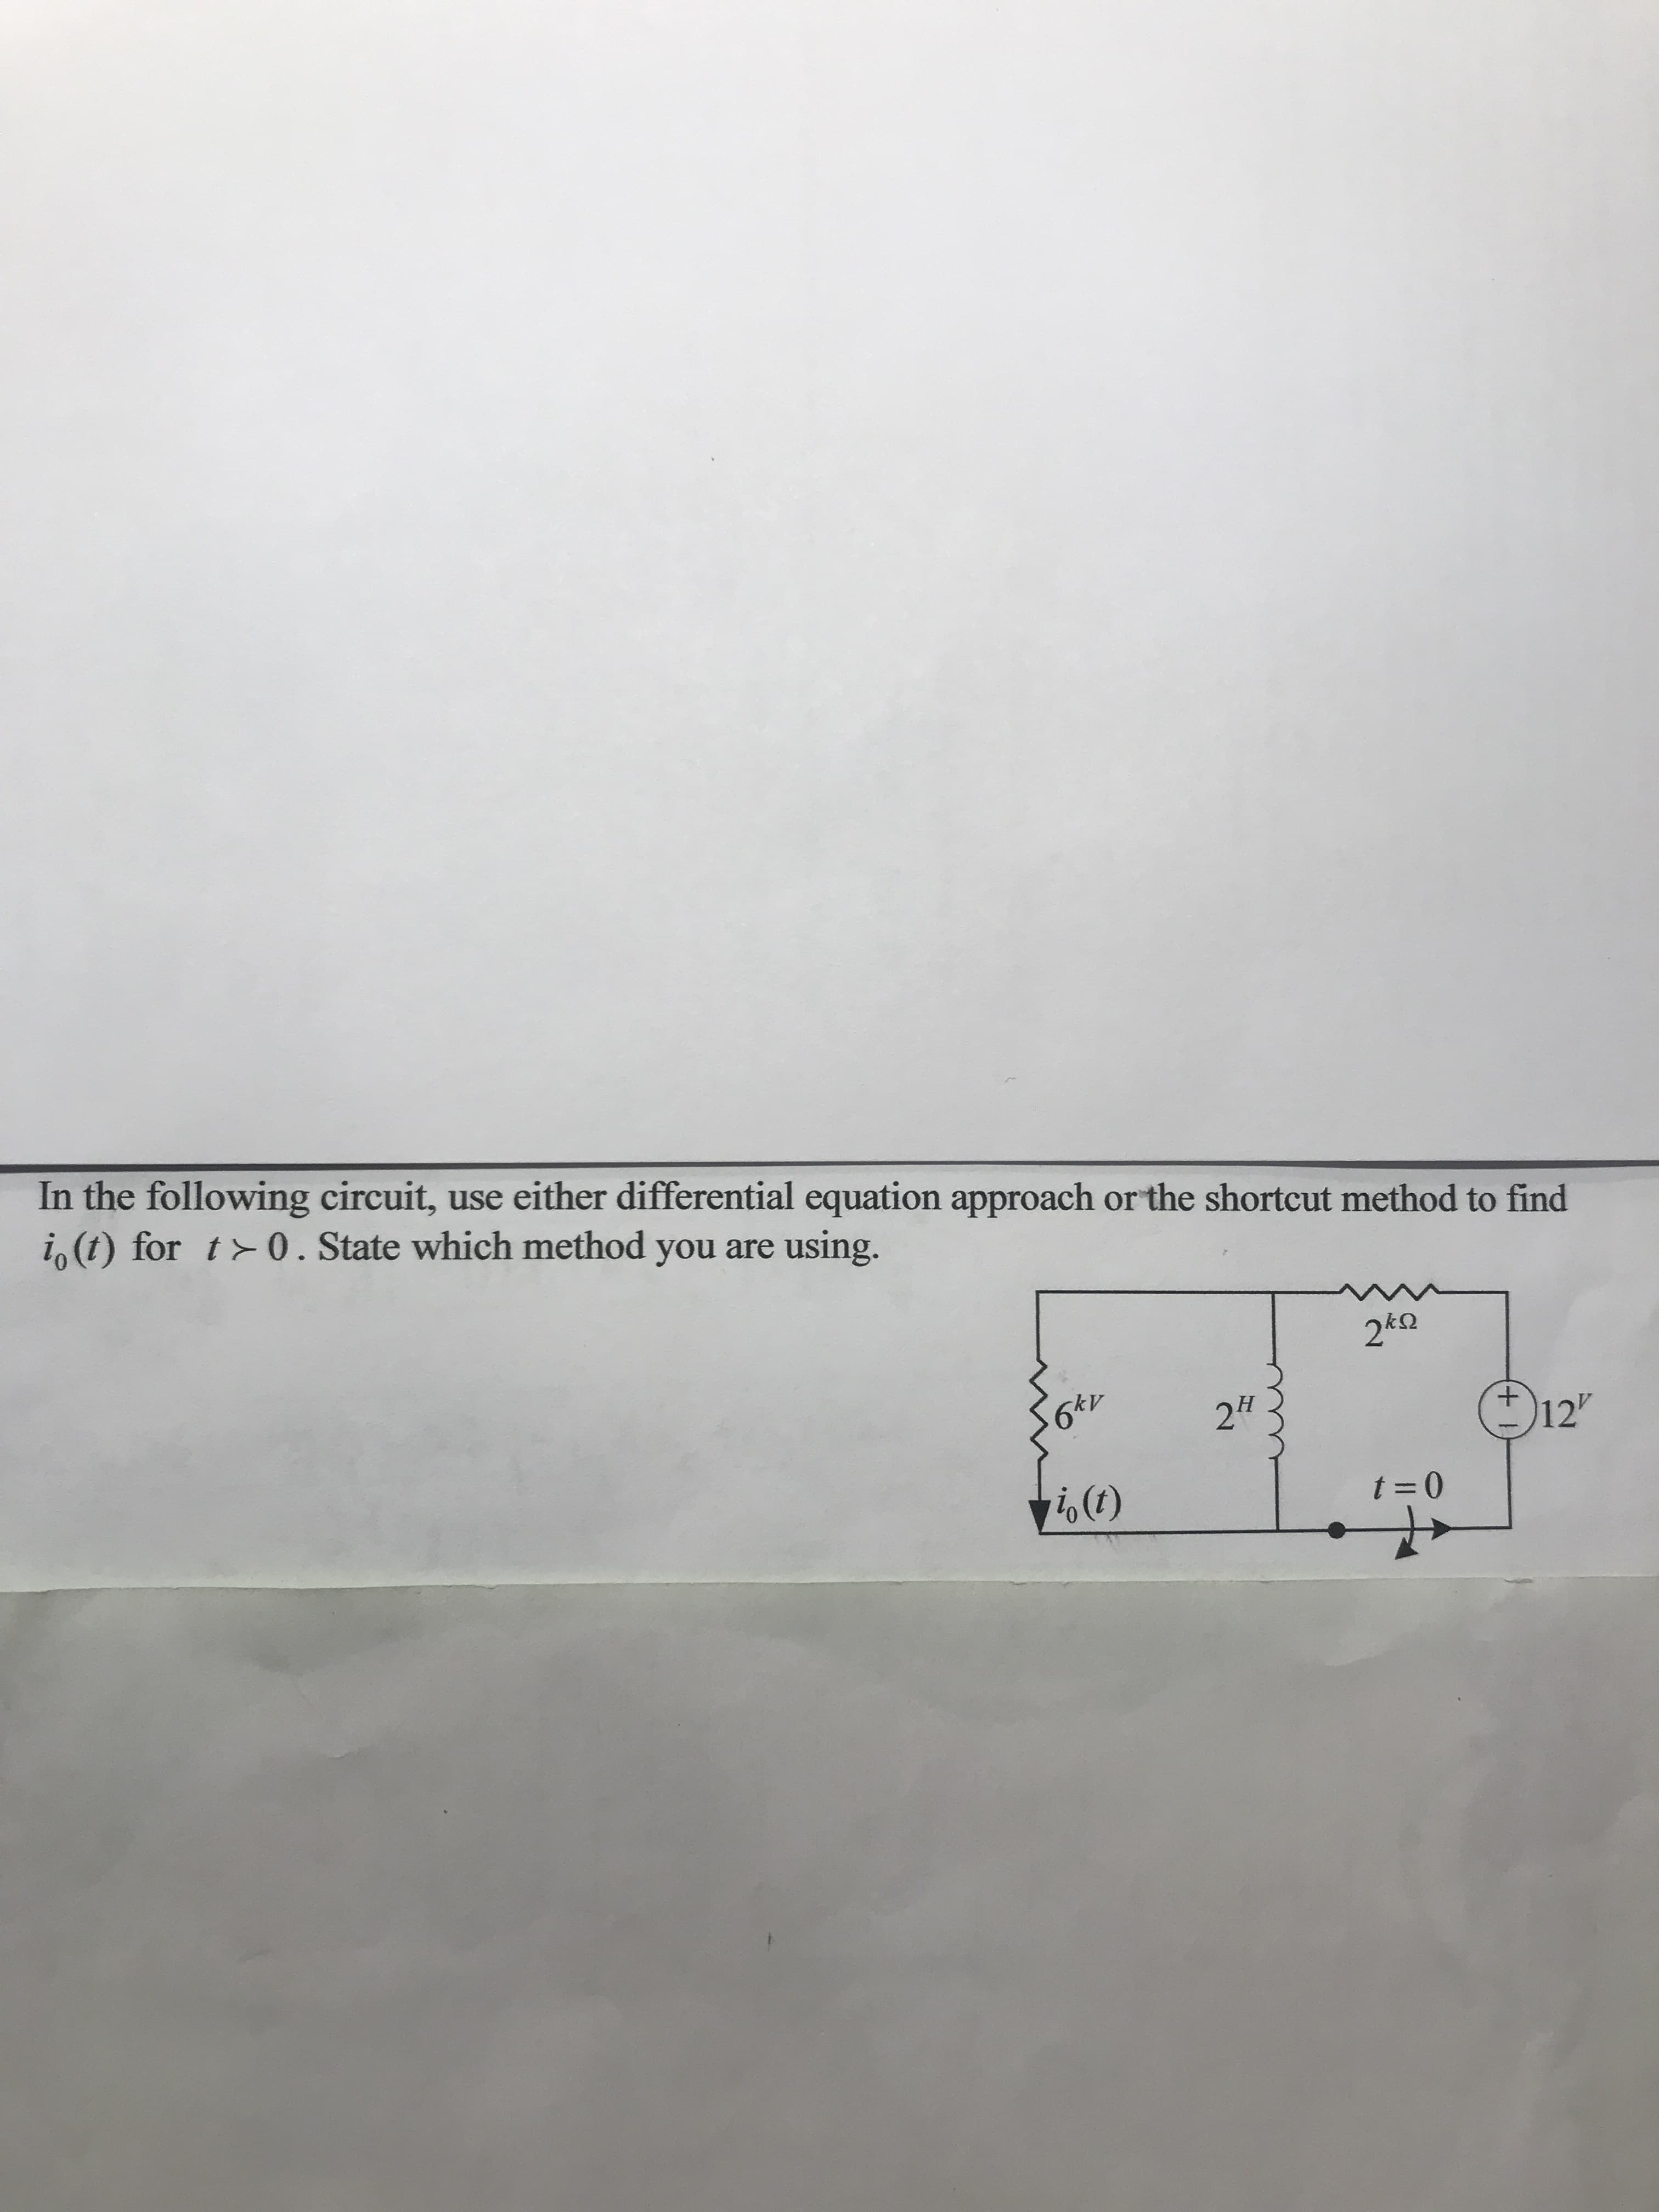 In the following circuit, use either differential equation approach or the shortcut method to find
io(t) fort 0. State which method you are using.
62"
kV
12
o (t)
t 0
